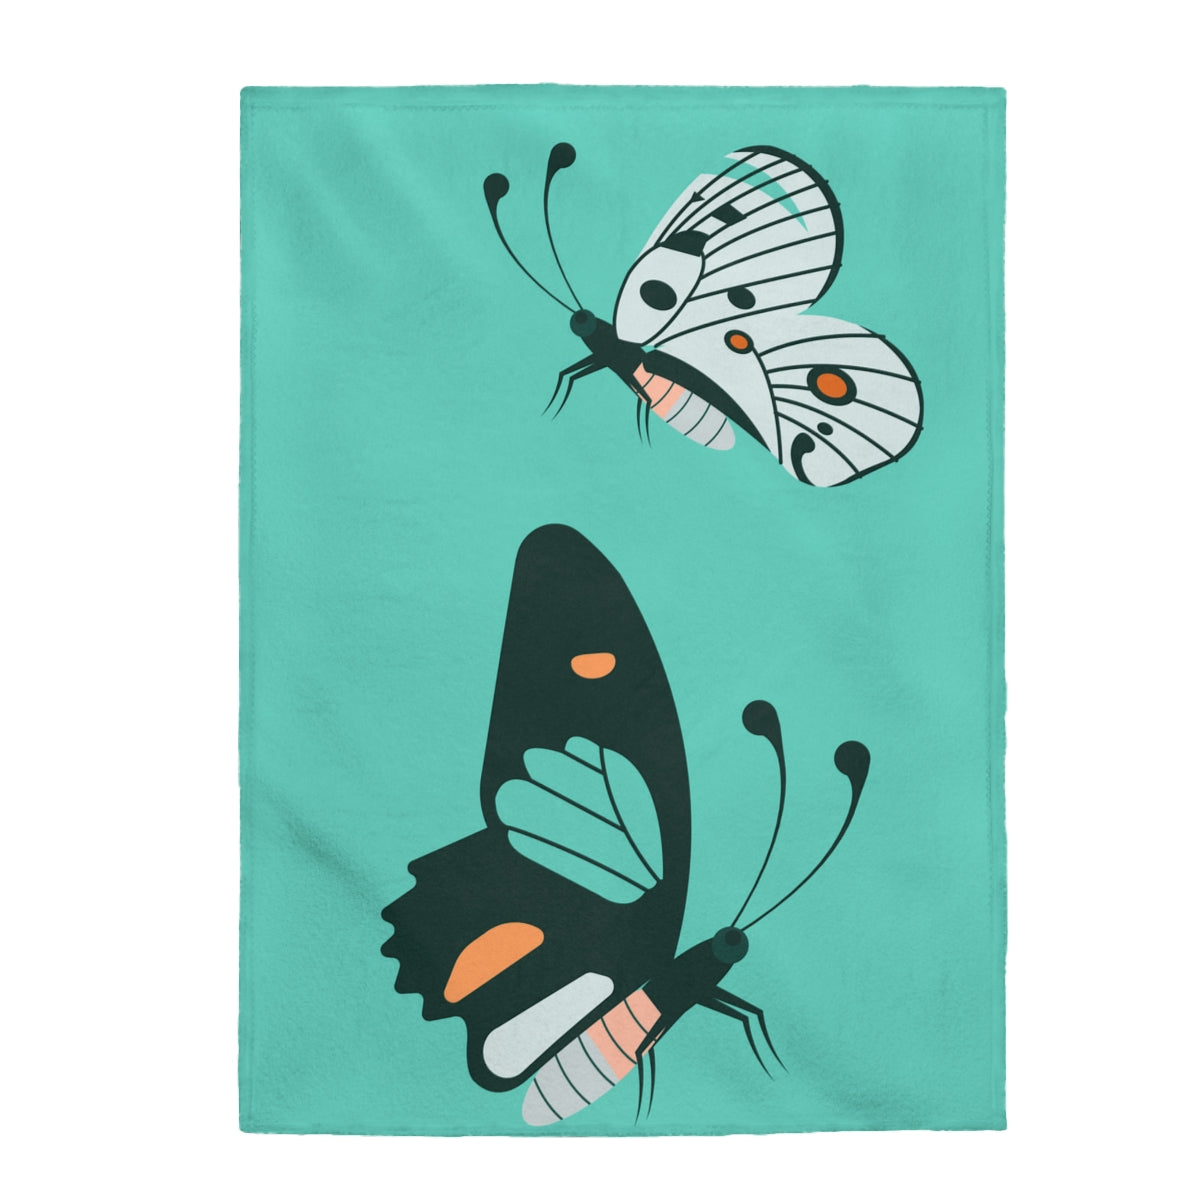 Plush Blanket for Kids Personalised, Butterfly, Newborn Blanket, Super Soft Cozy Throw Blankt for Teens, Adults